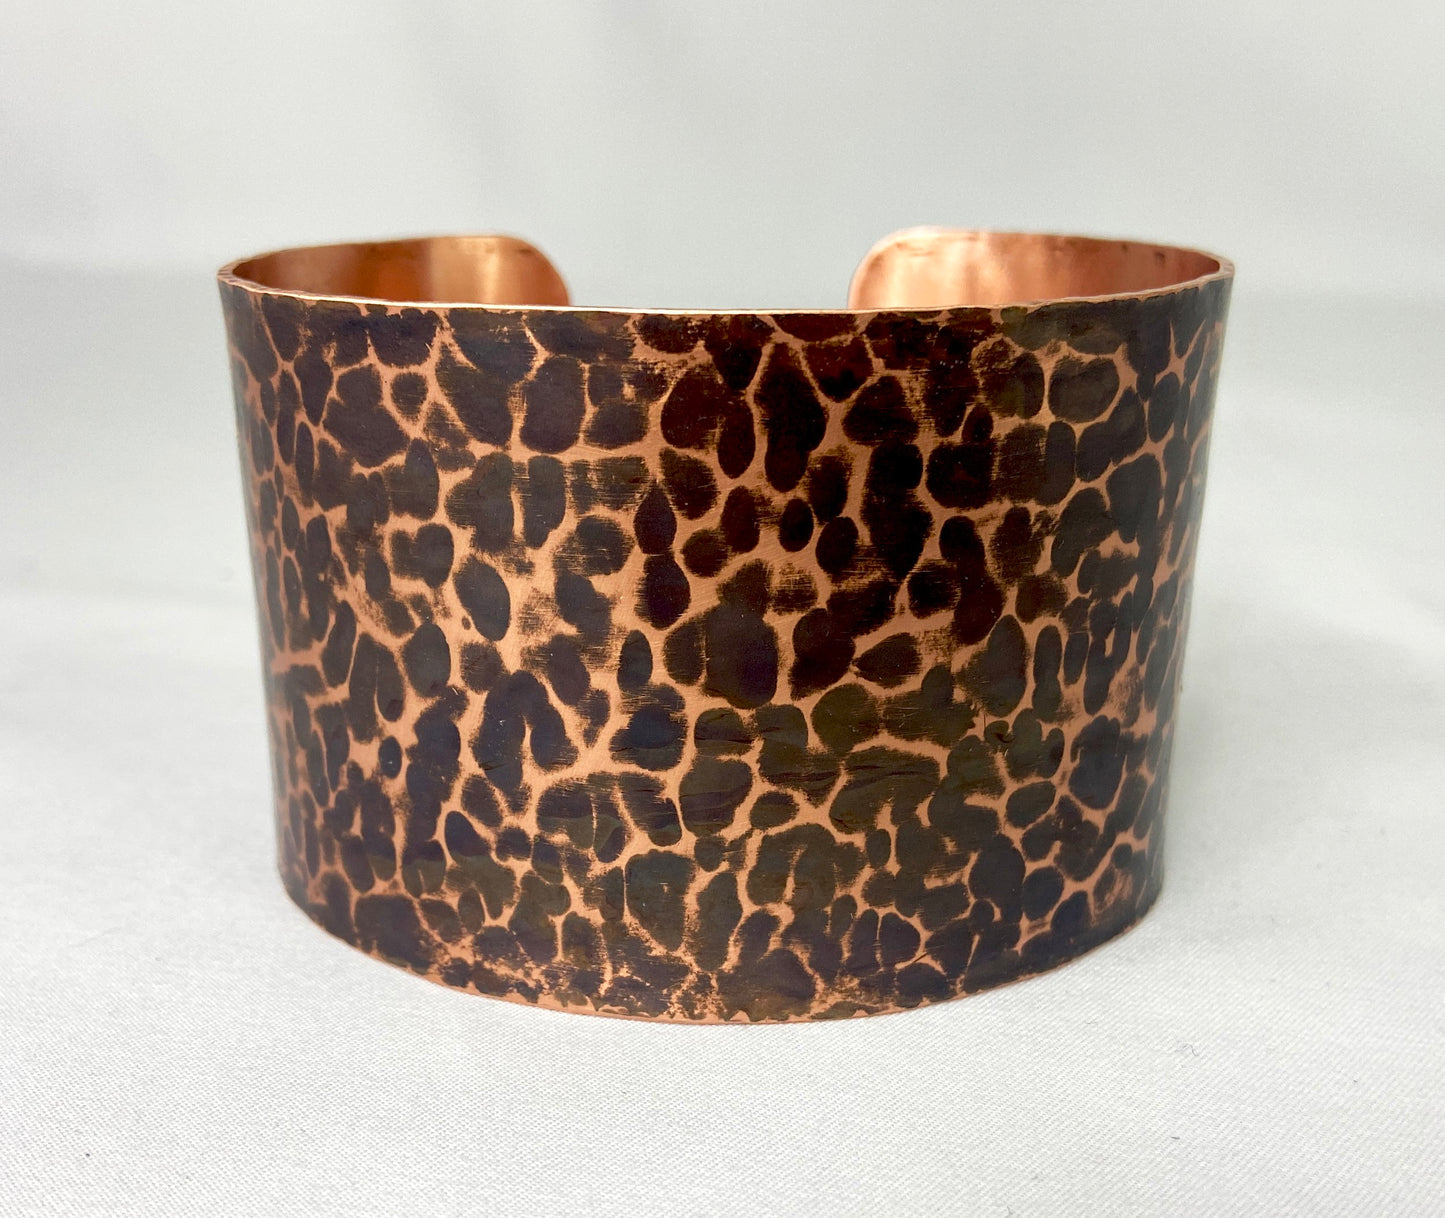 Large Hammered Copper Cuff Bracelet with Torch Patina